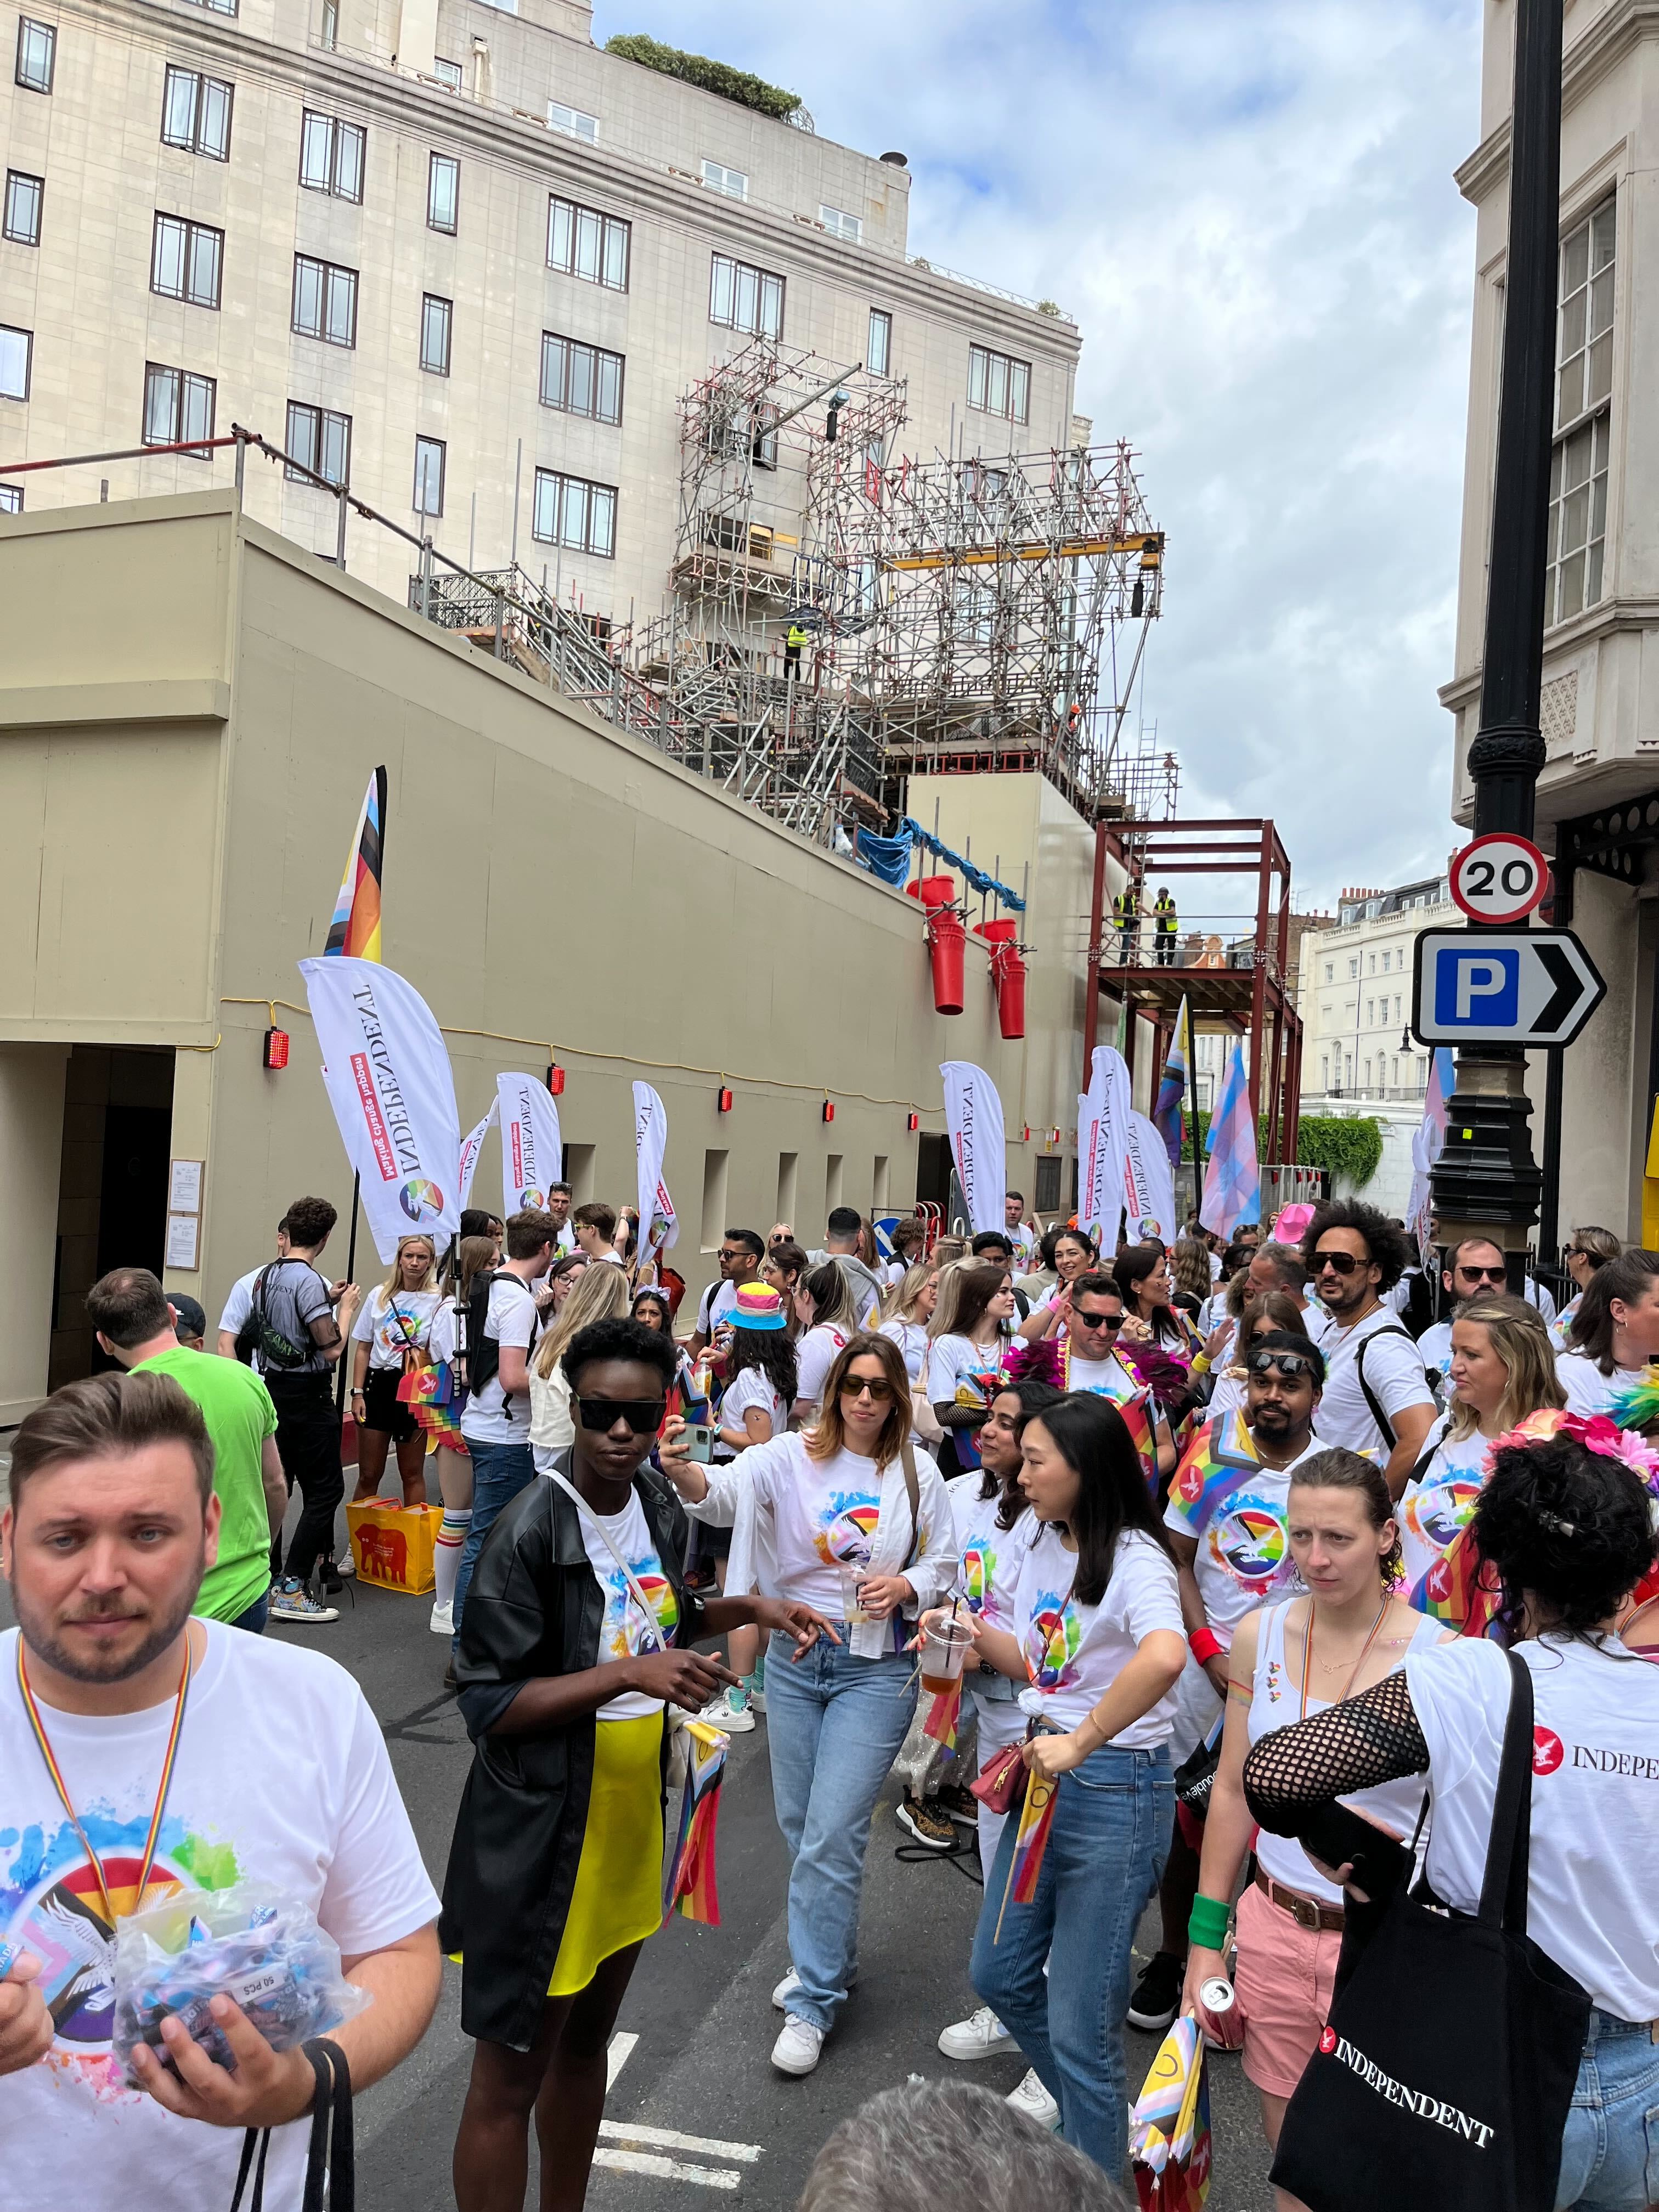 The Independent are ready for the Pride in London parade, with members of the newsroom, including editor-in-chief Geordie Greig, all gathered in the central London crowds.